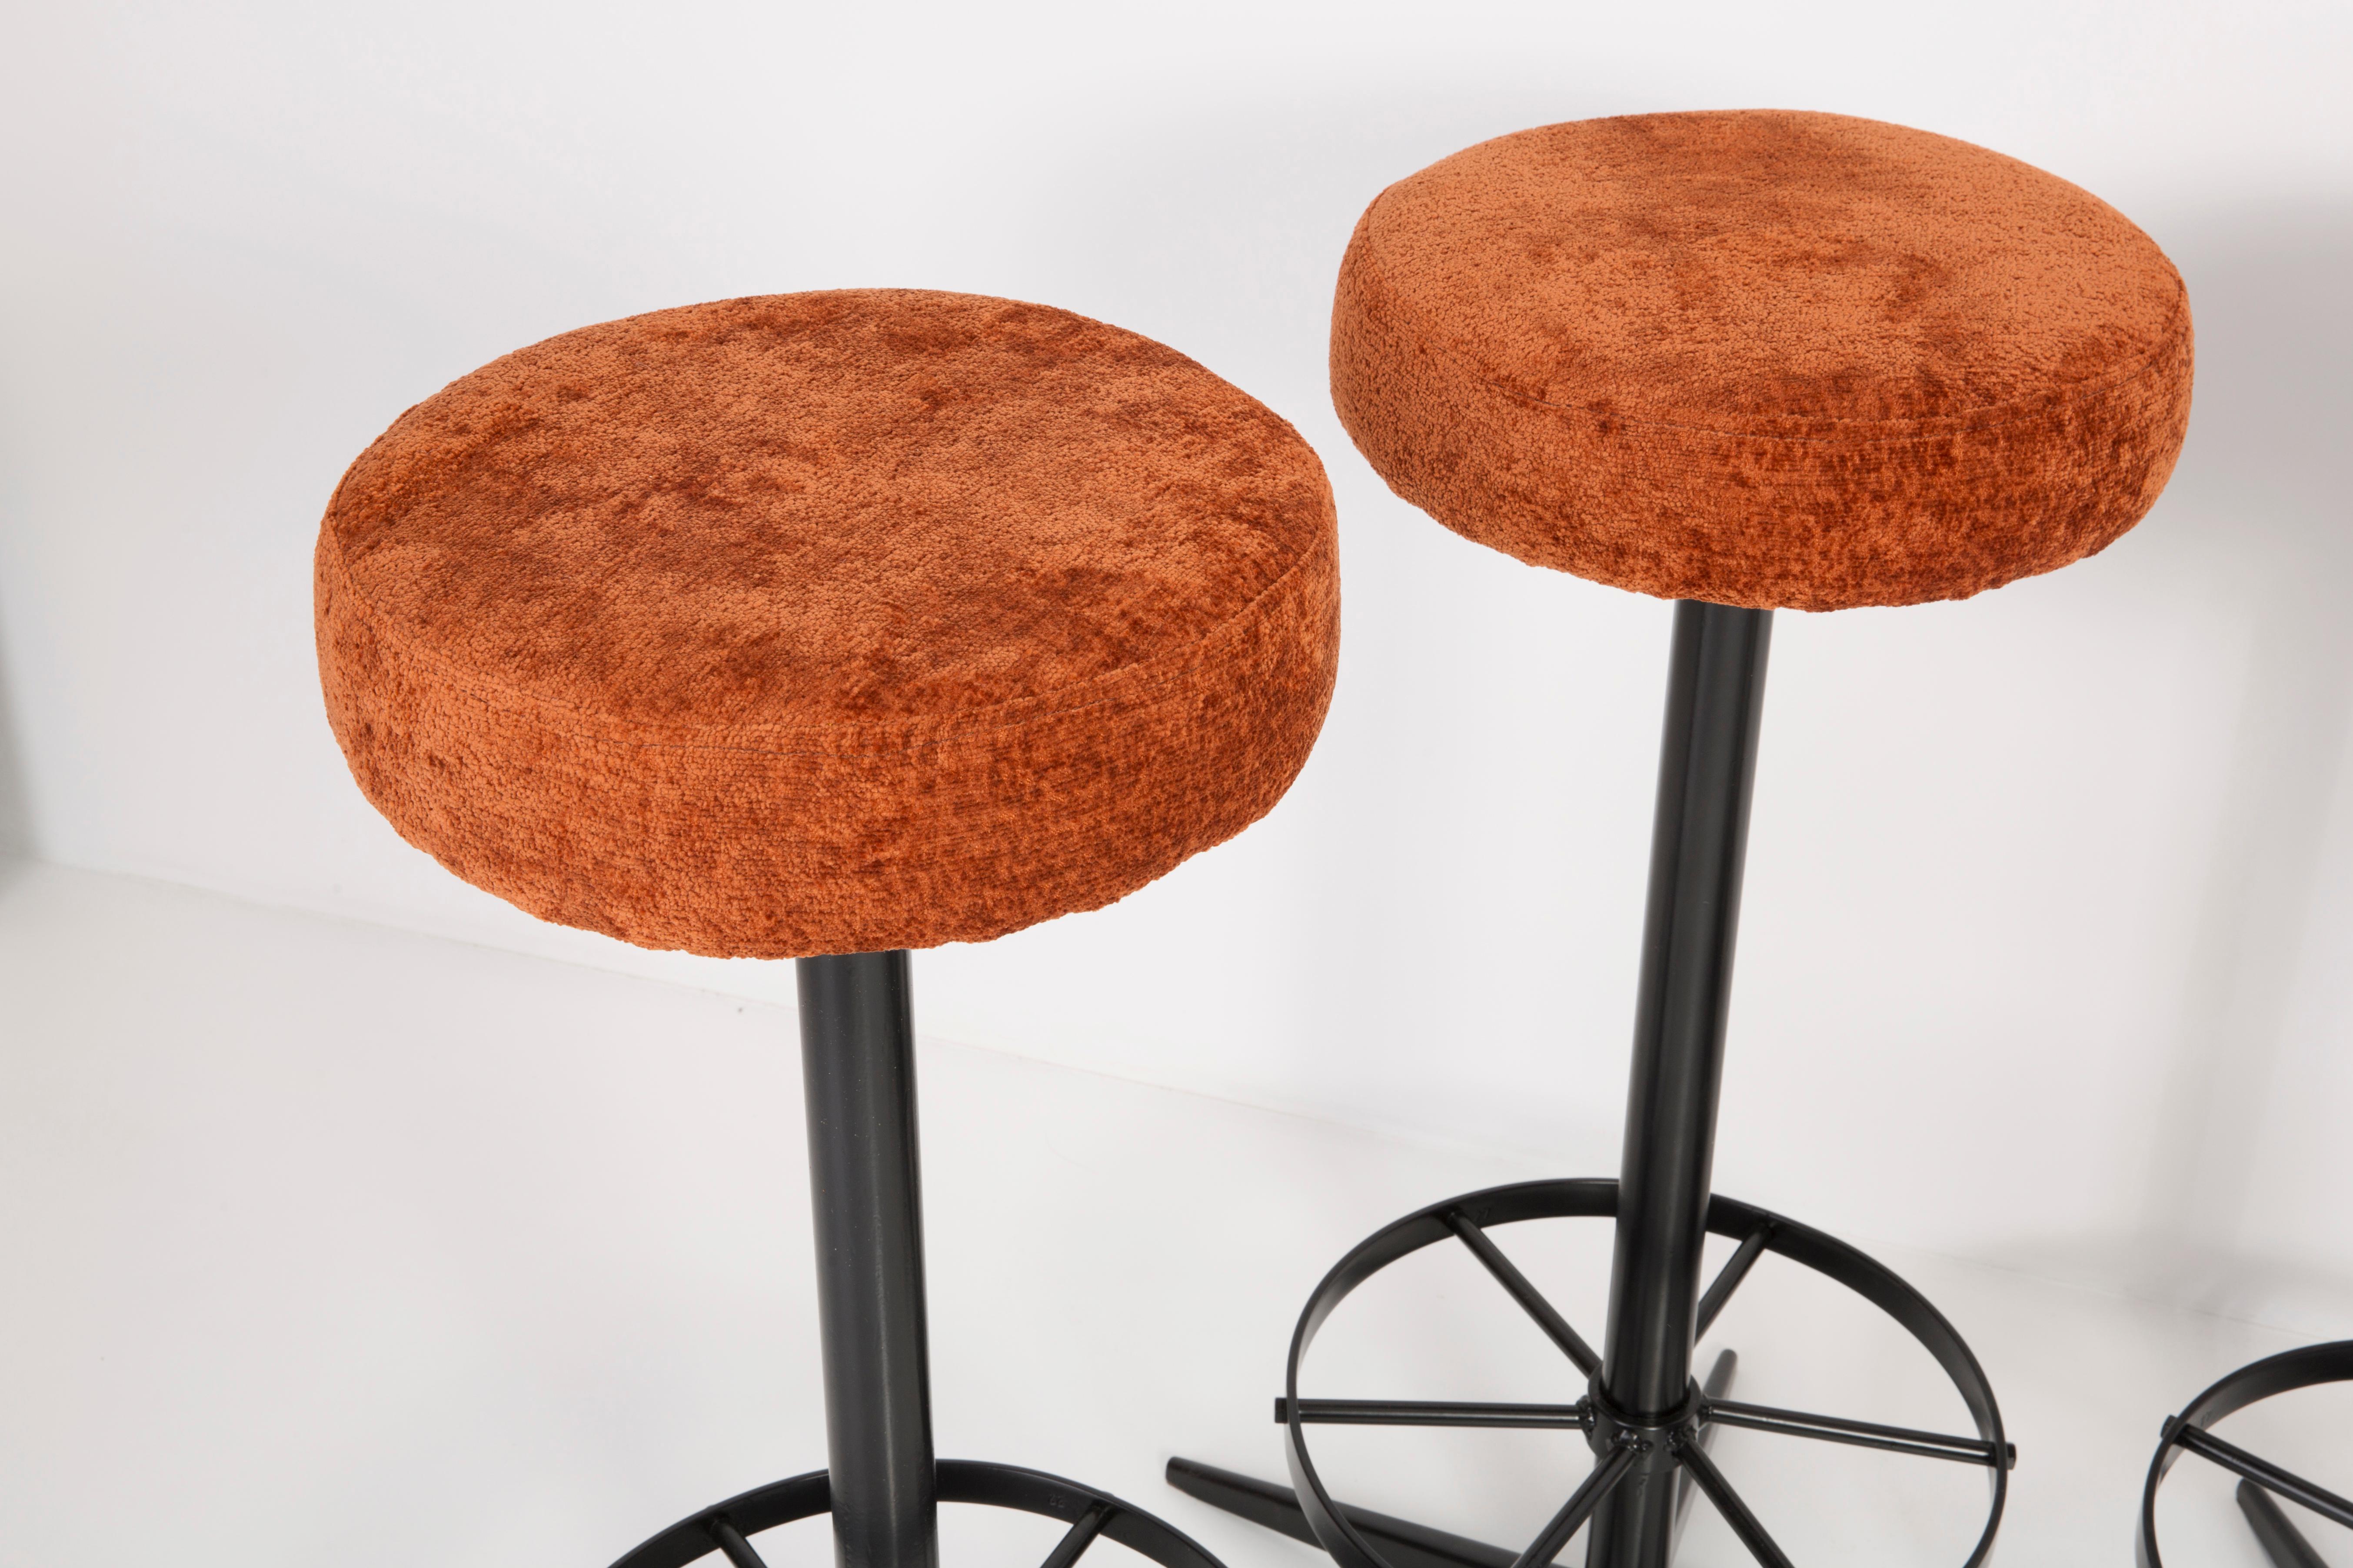 Stools from the turn of the 1960s. Produced in Germany beautiful, well-crafted dark orange upholstery. The stools consist of an upholstered part, a seat and steel black legs. They are not regulated. The height is constant.